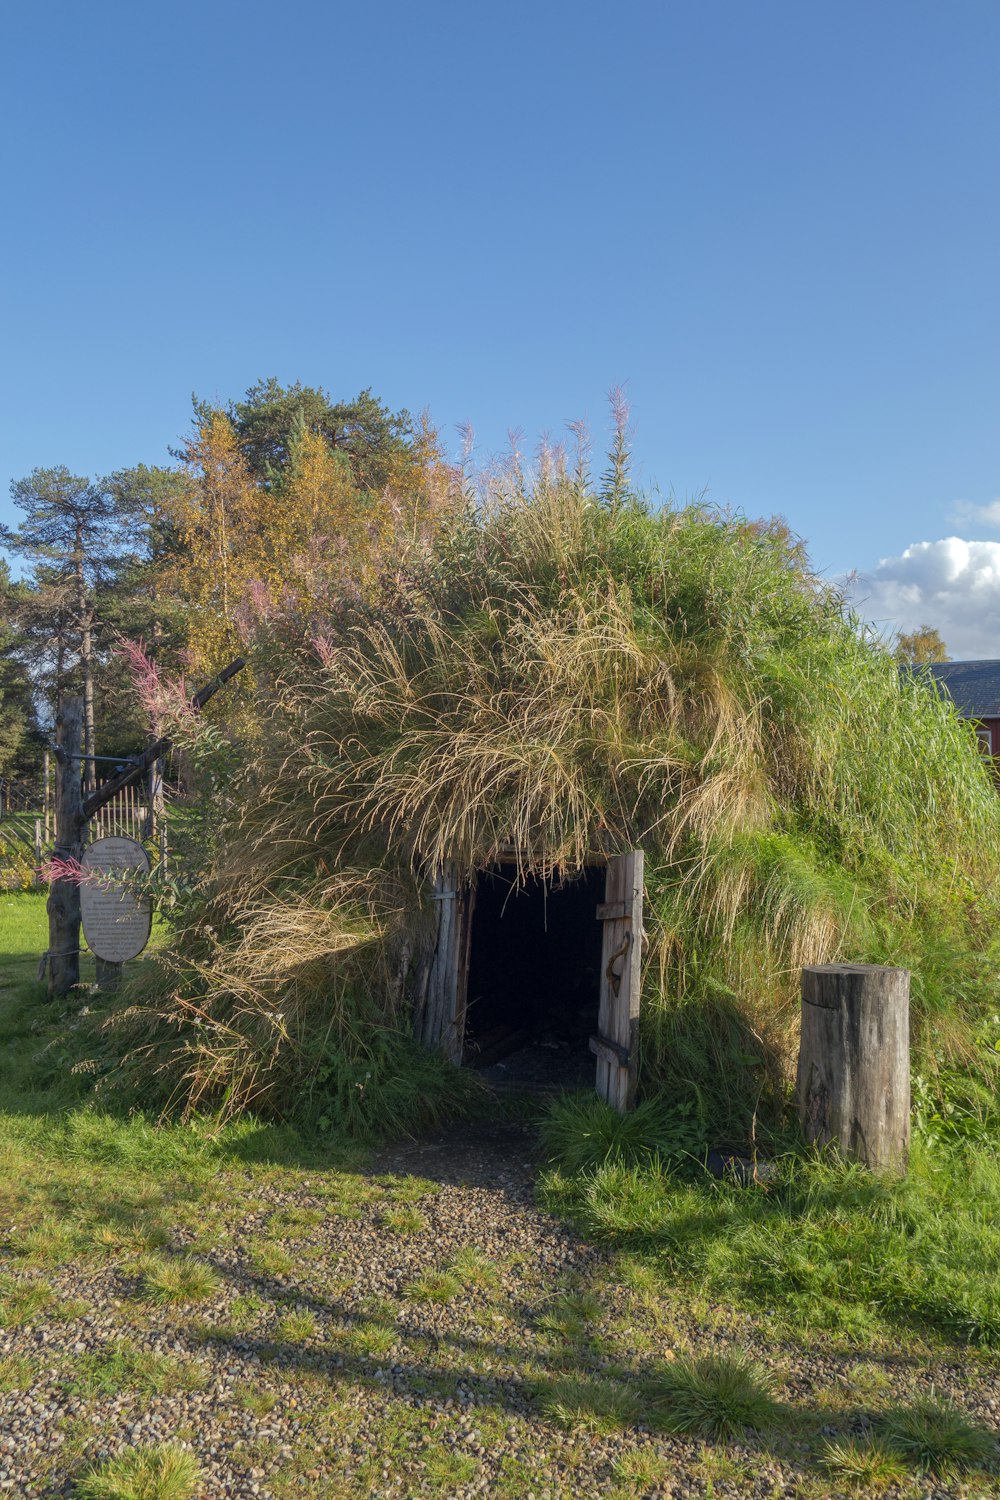 a small hut with grass growing out of it